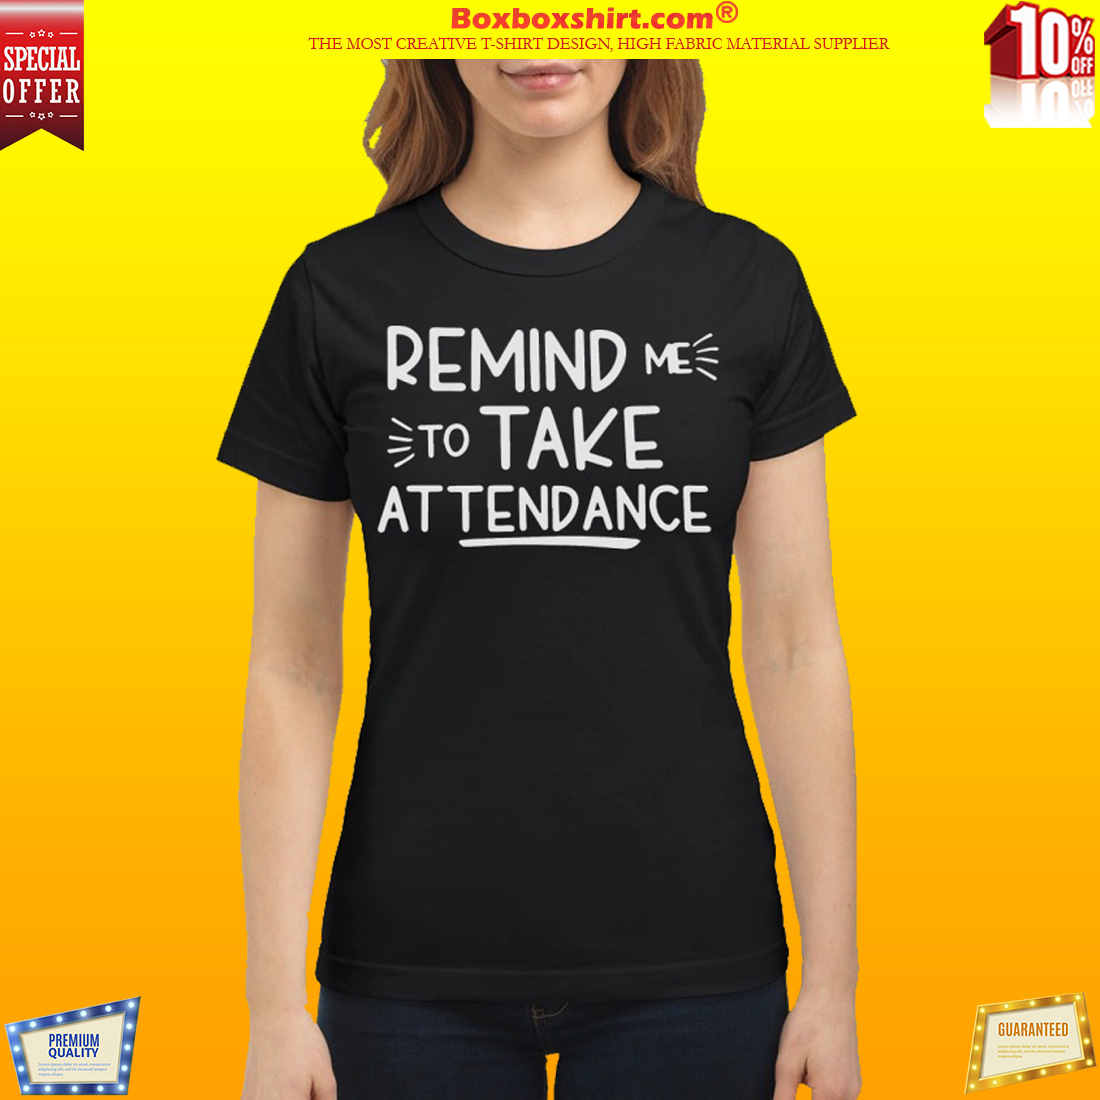 Remind me to take attendance classic shirt and sweatshirt